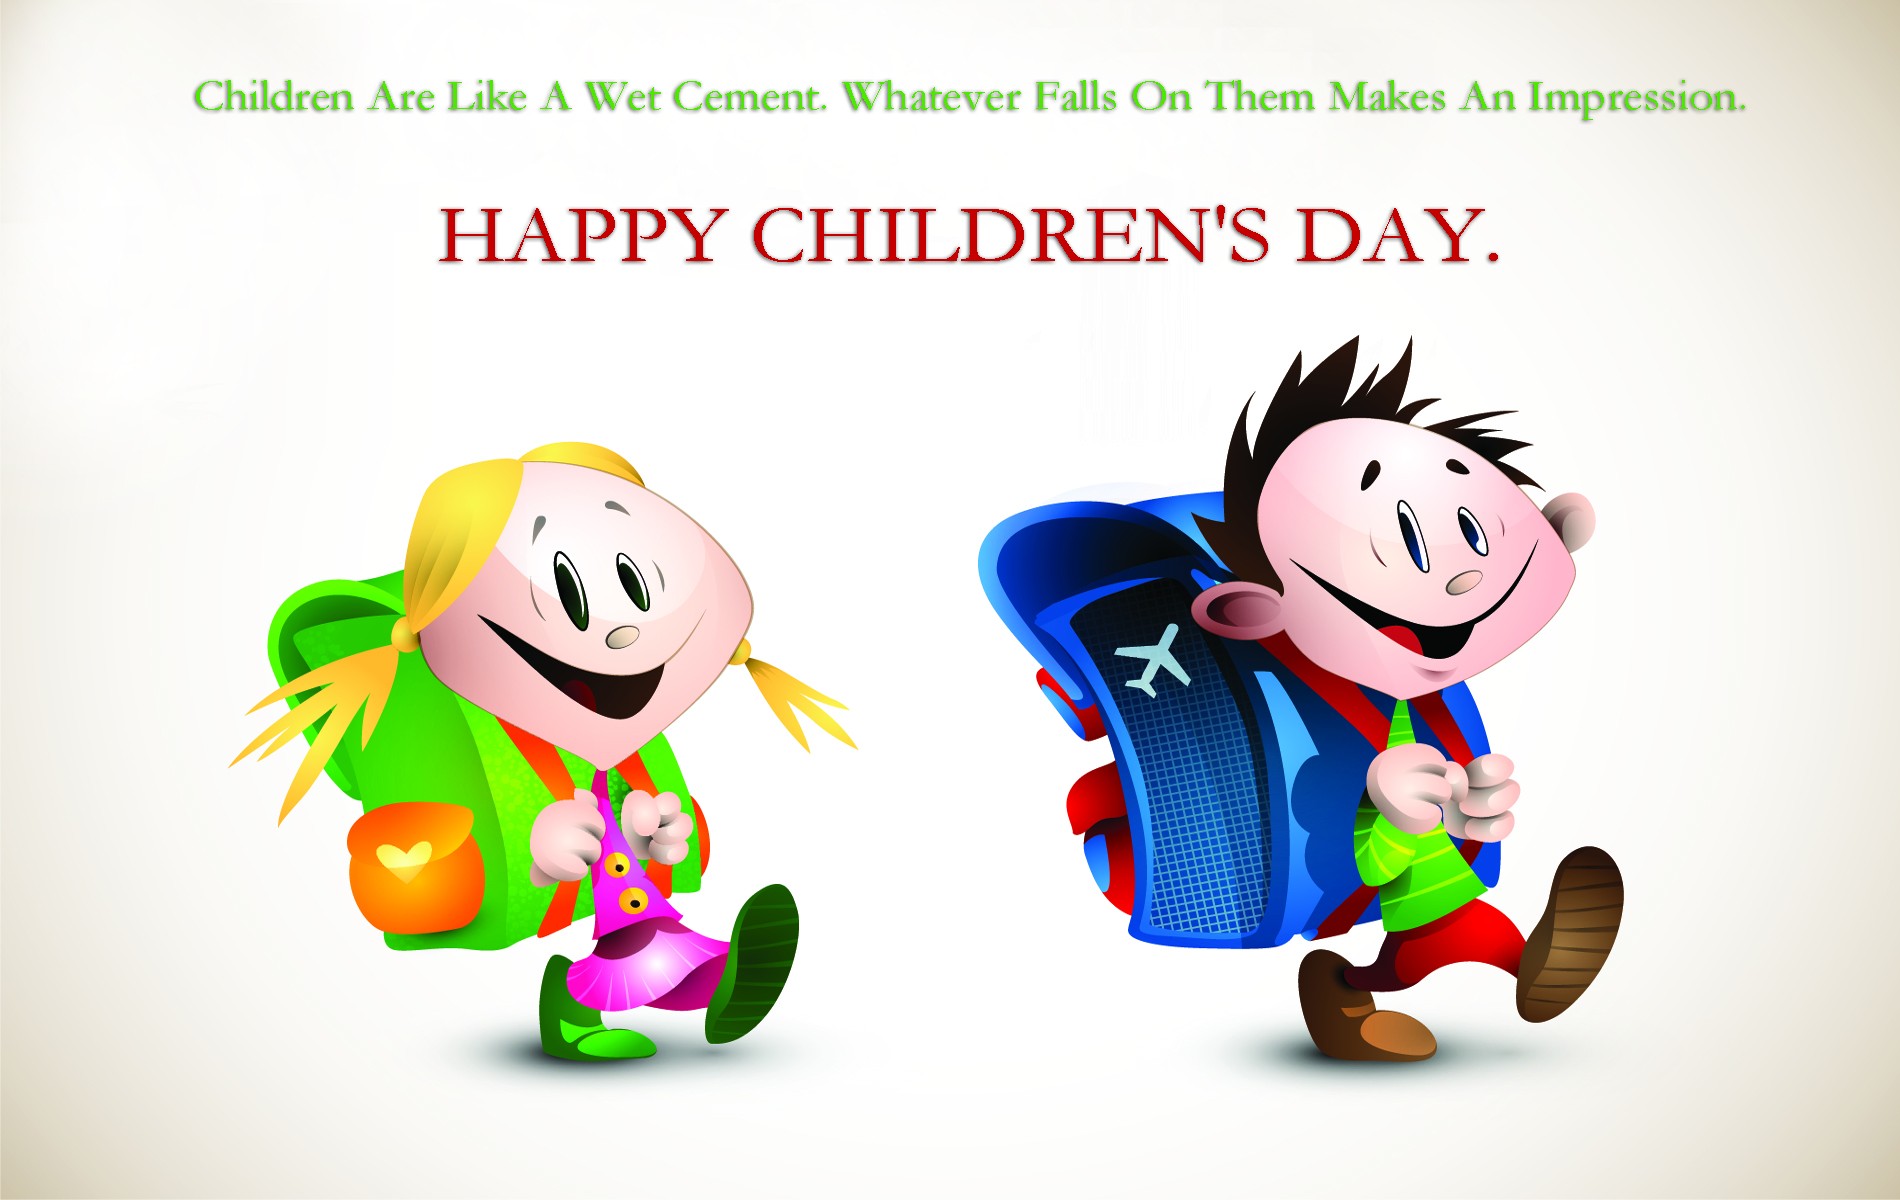 Happy Childrens Day Images, Hd Wallpapers, And Photos - Happy Children's  Day Images Hd - 1900x1200 Wallpaper 